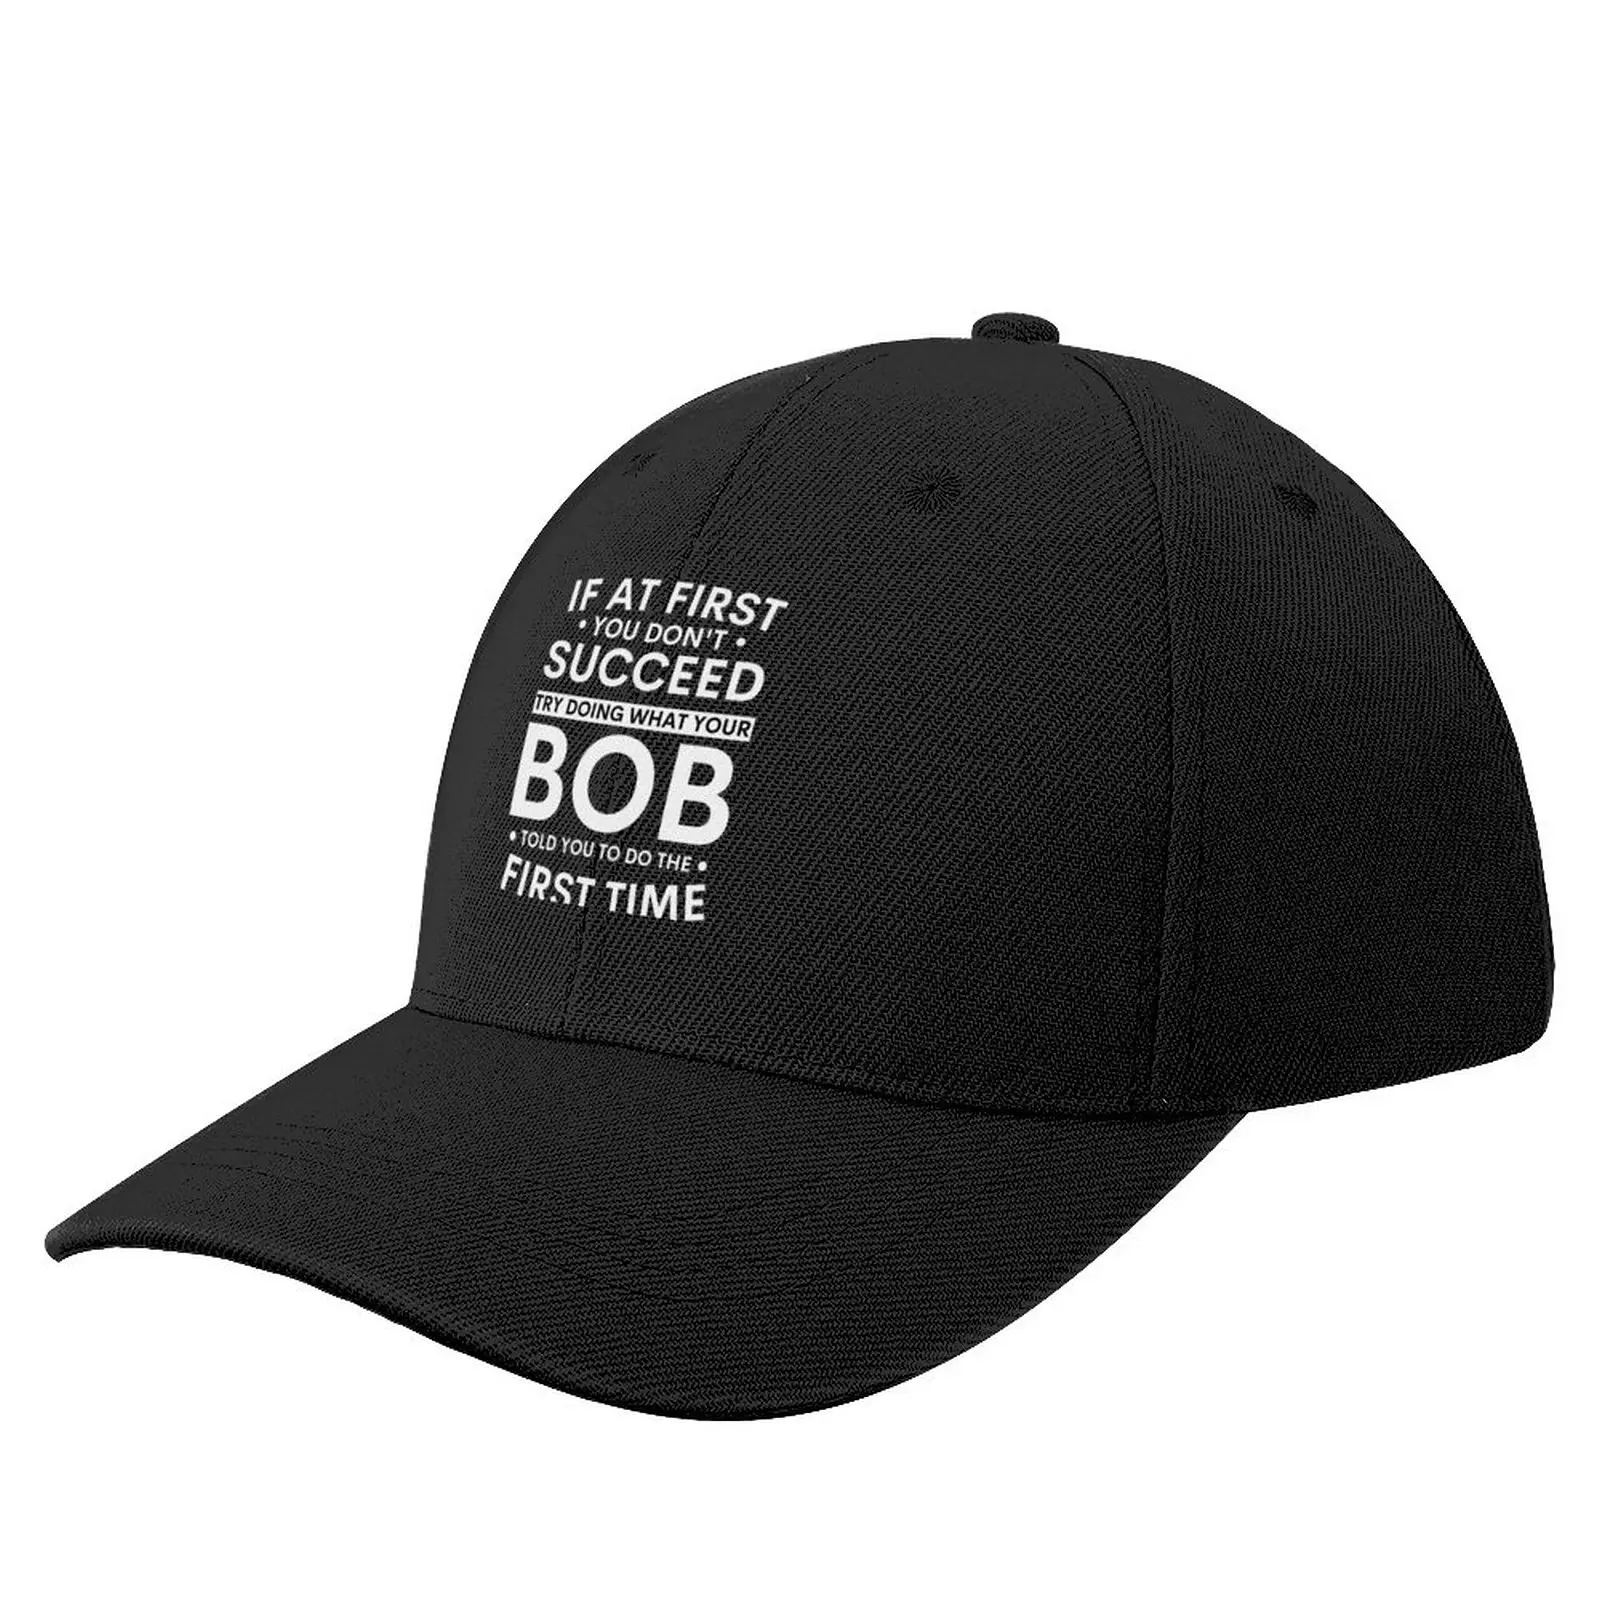 

If At First You Dont Succeed Try Doing What Bob Told You To Do The First Time Funny Christmas Joke Baseball Cap